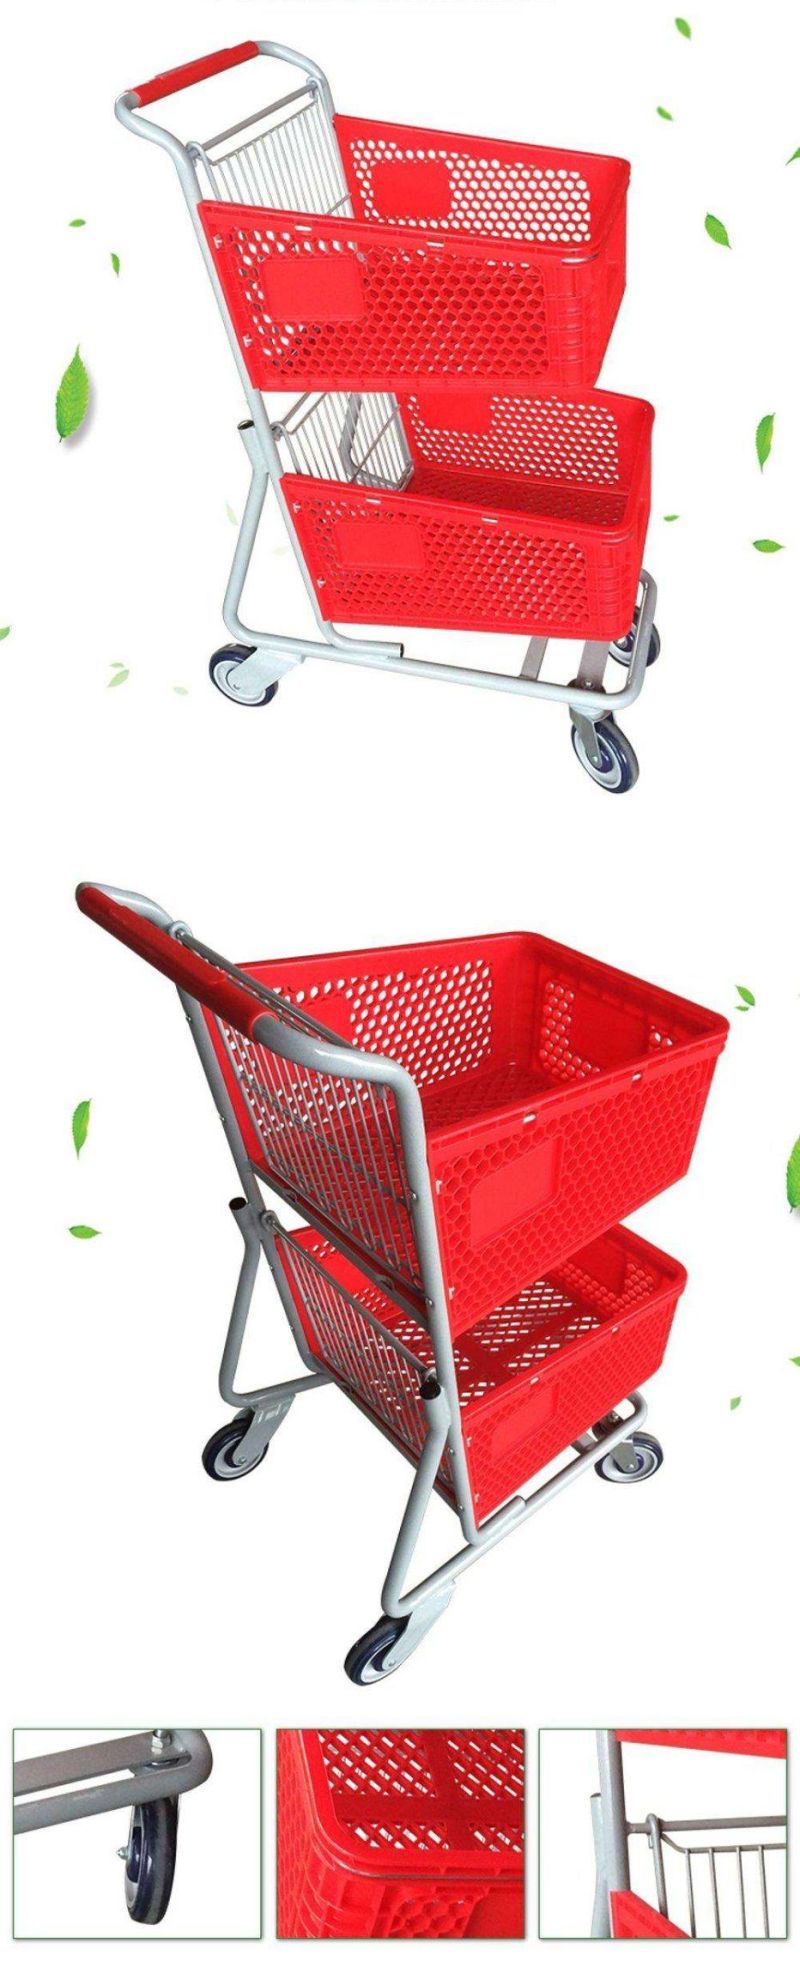 Double Layers Basket Cart Wheeled Grocery Shopping Trolley